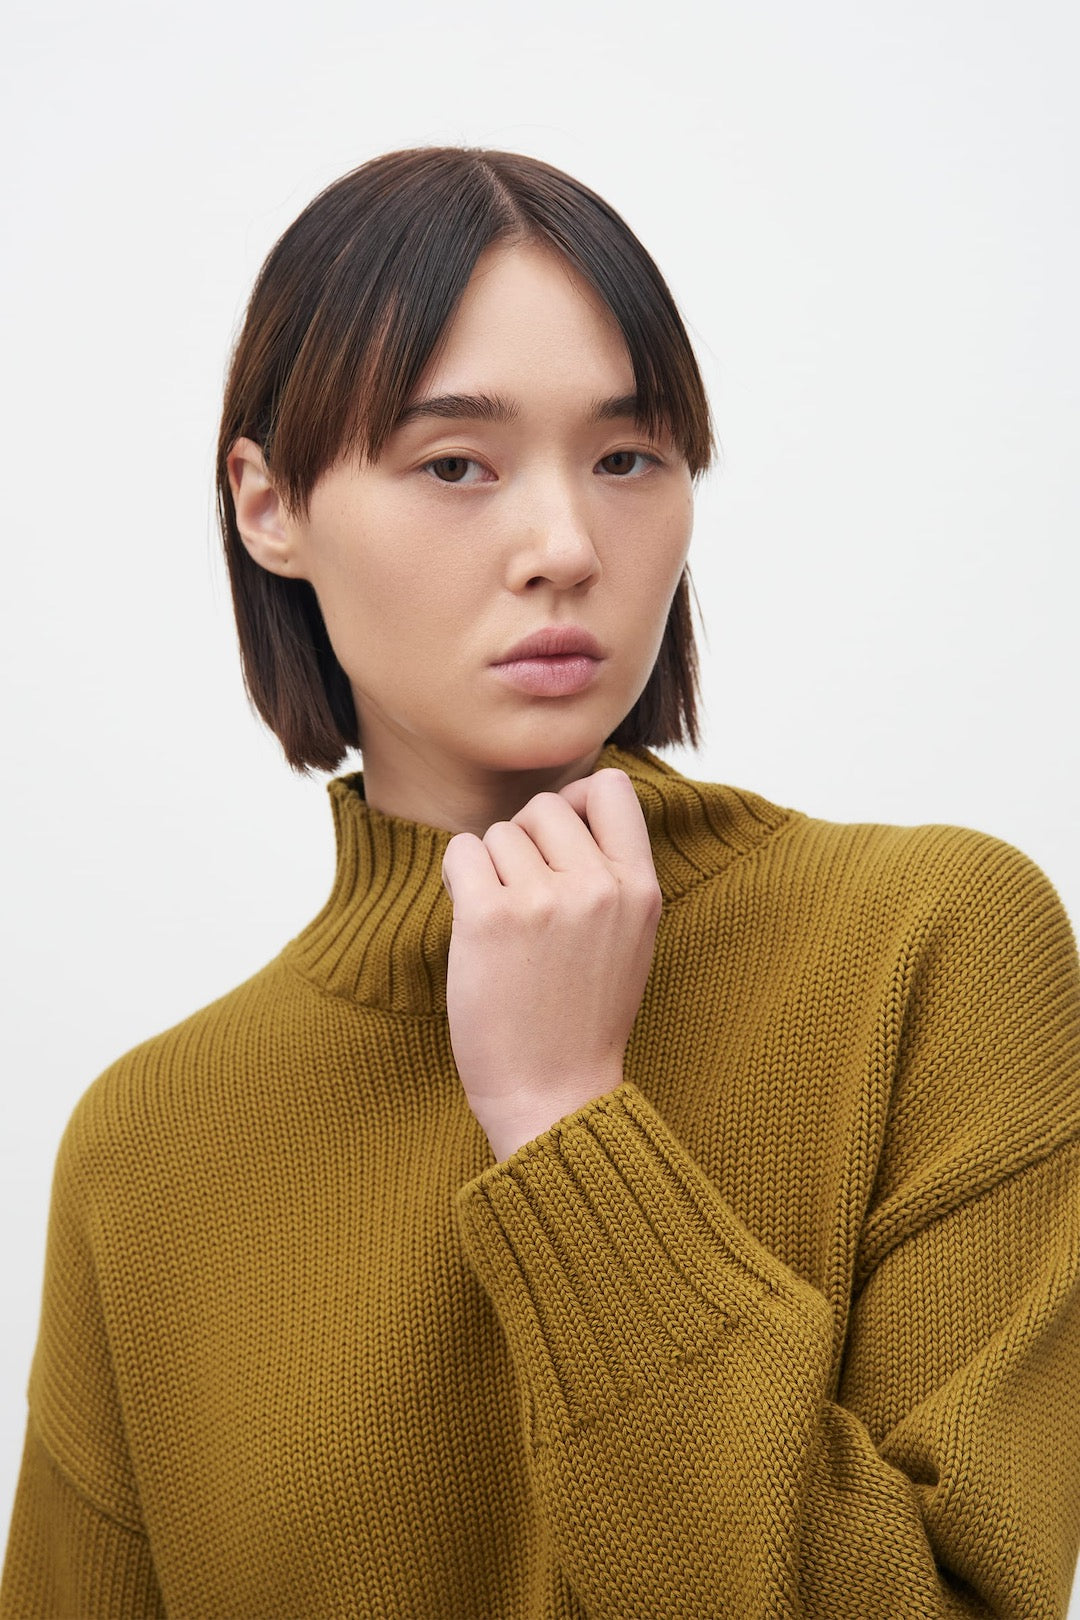 The model is wearing a Kowtow Staple Sweater - Chartreuse.